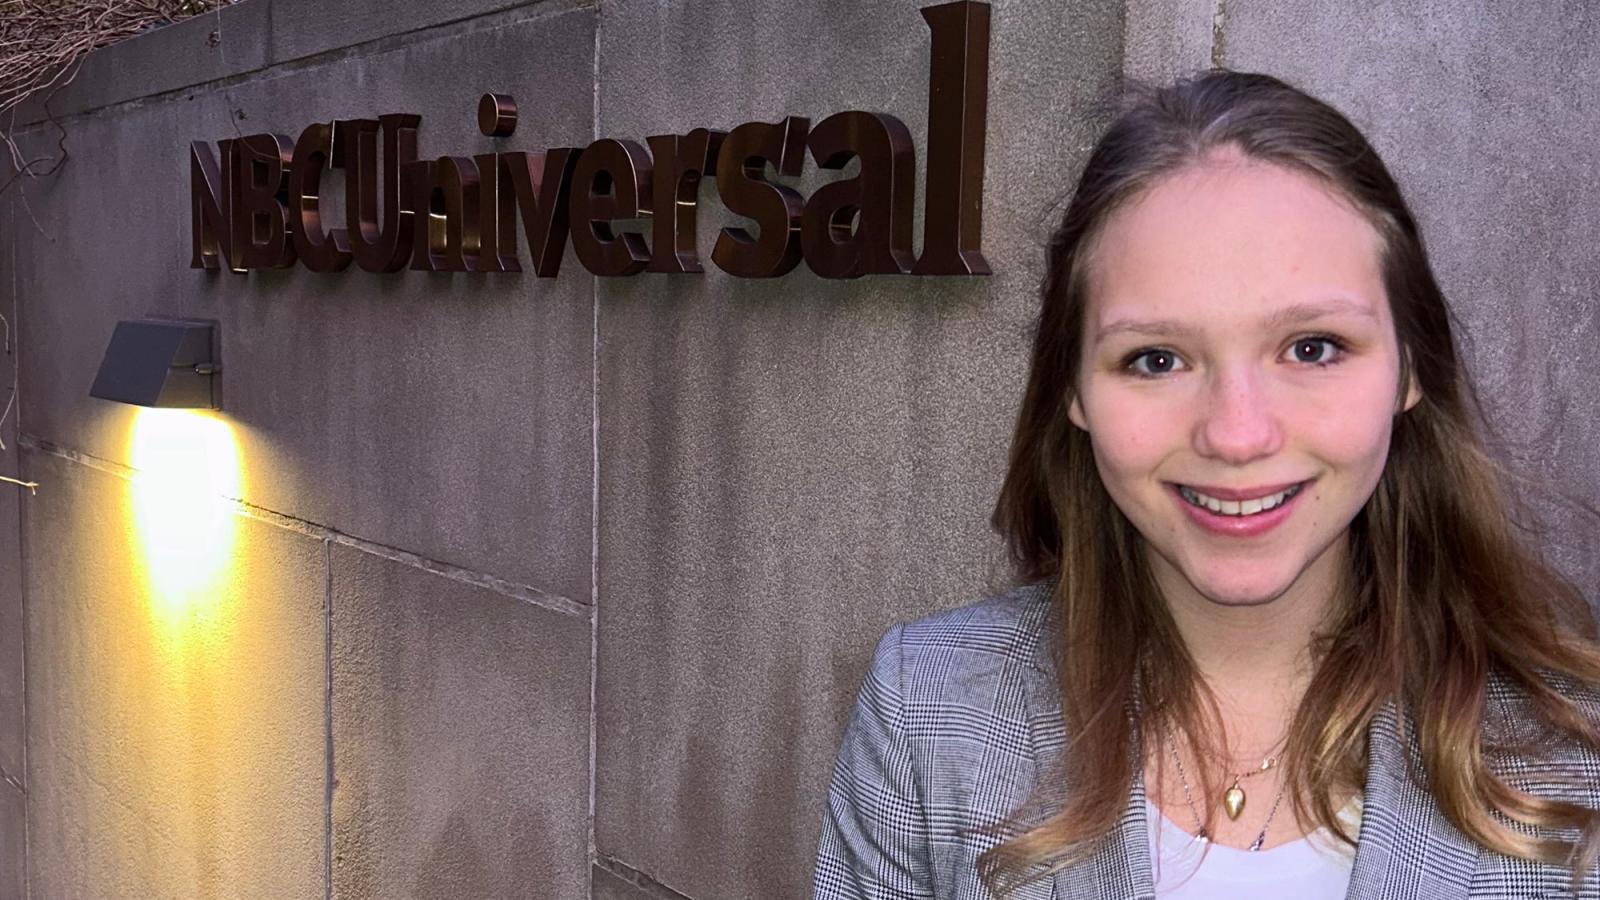 Pace student Amber Brouwer stands in front of the NBCUniversal sign